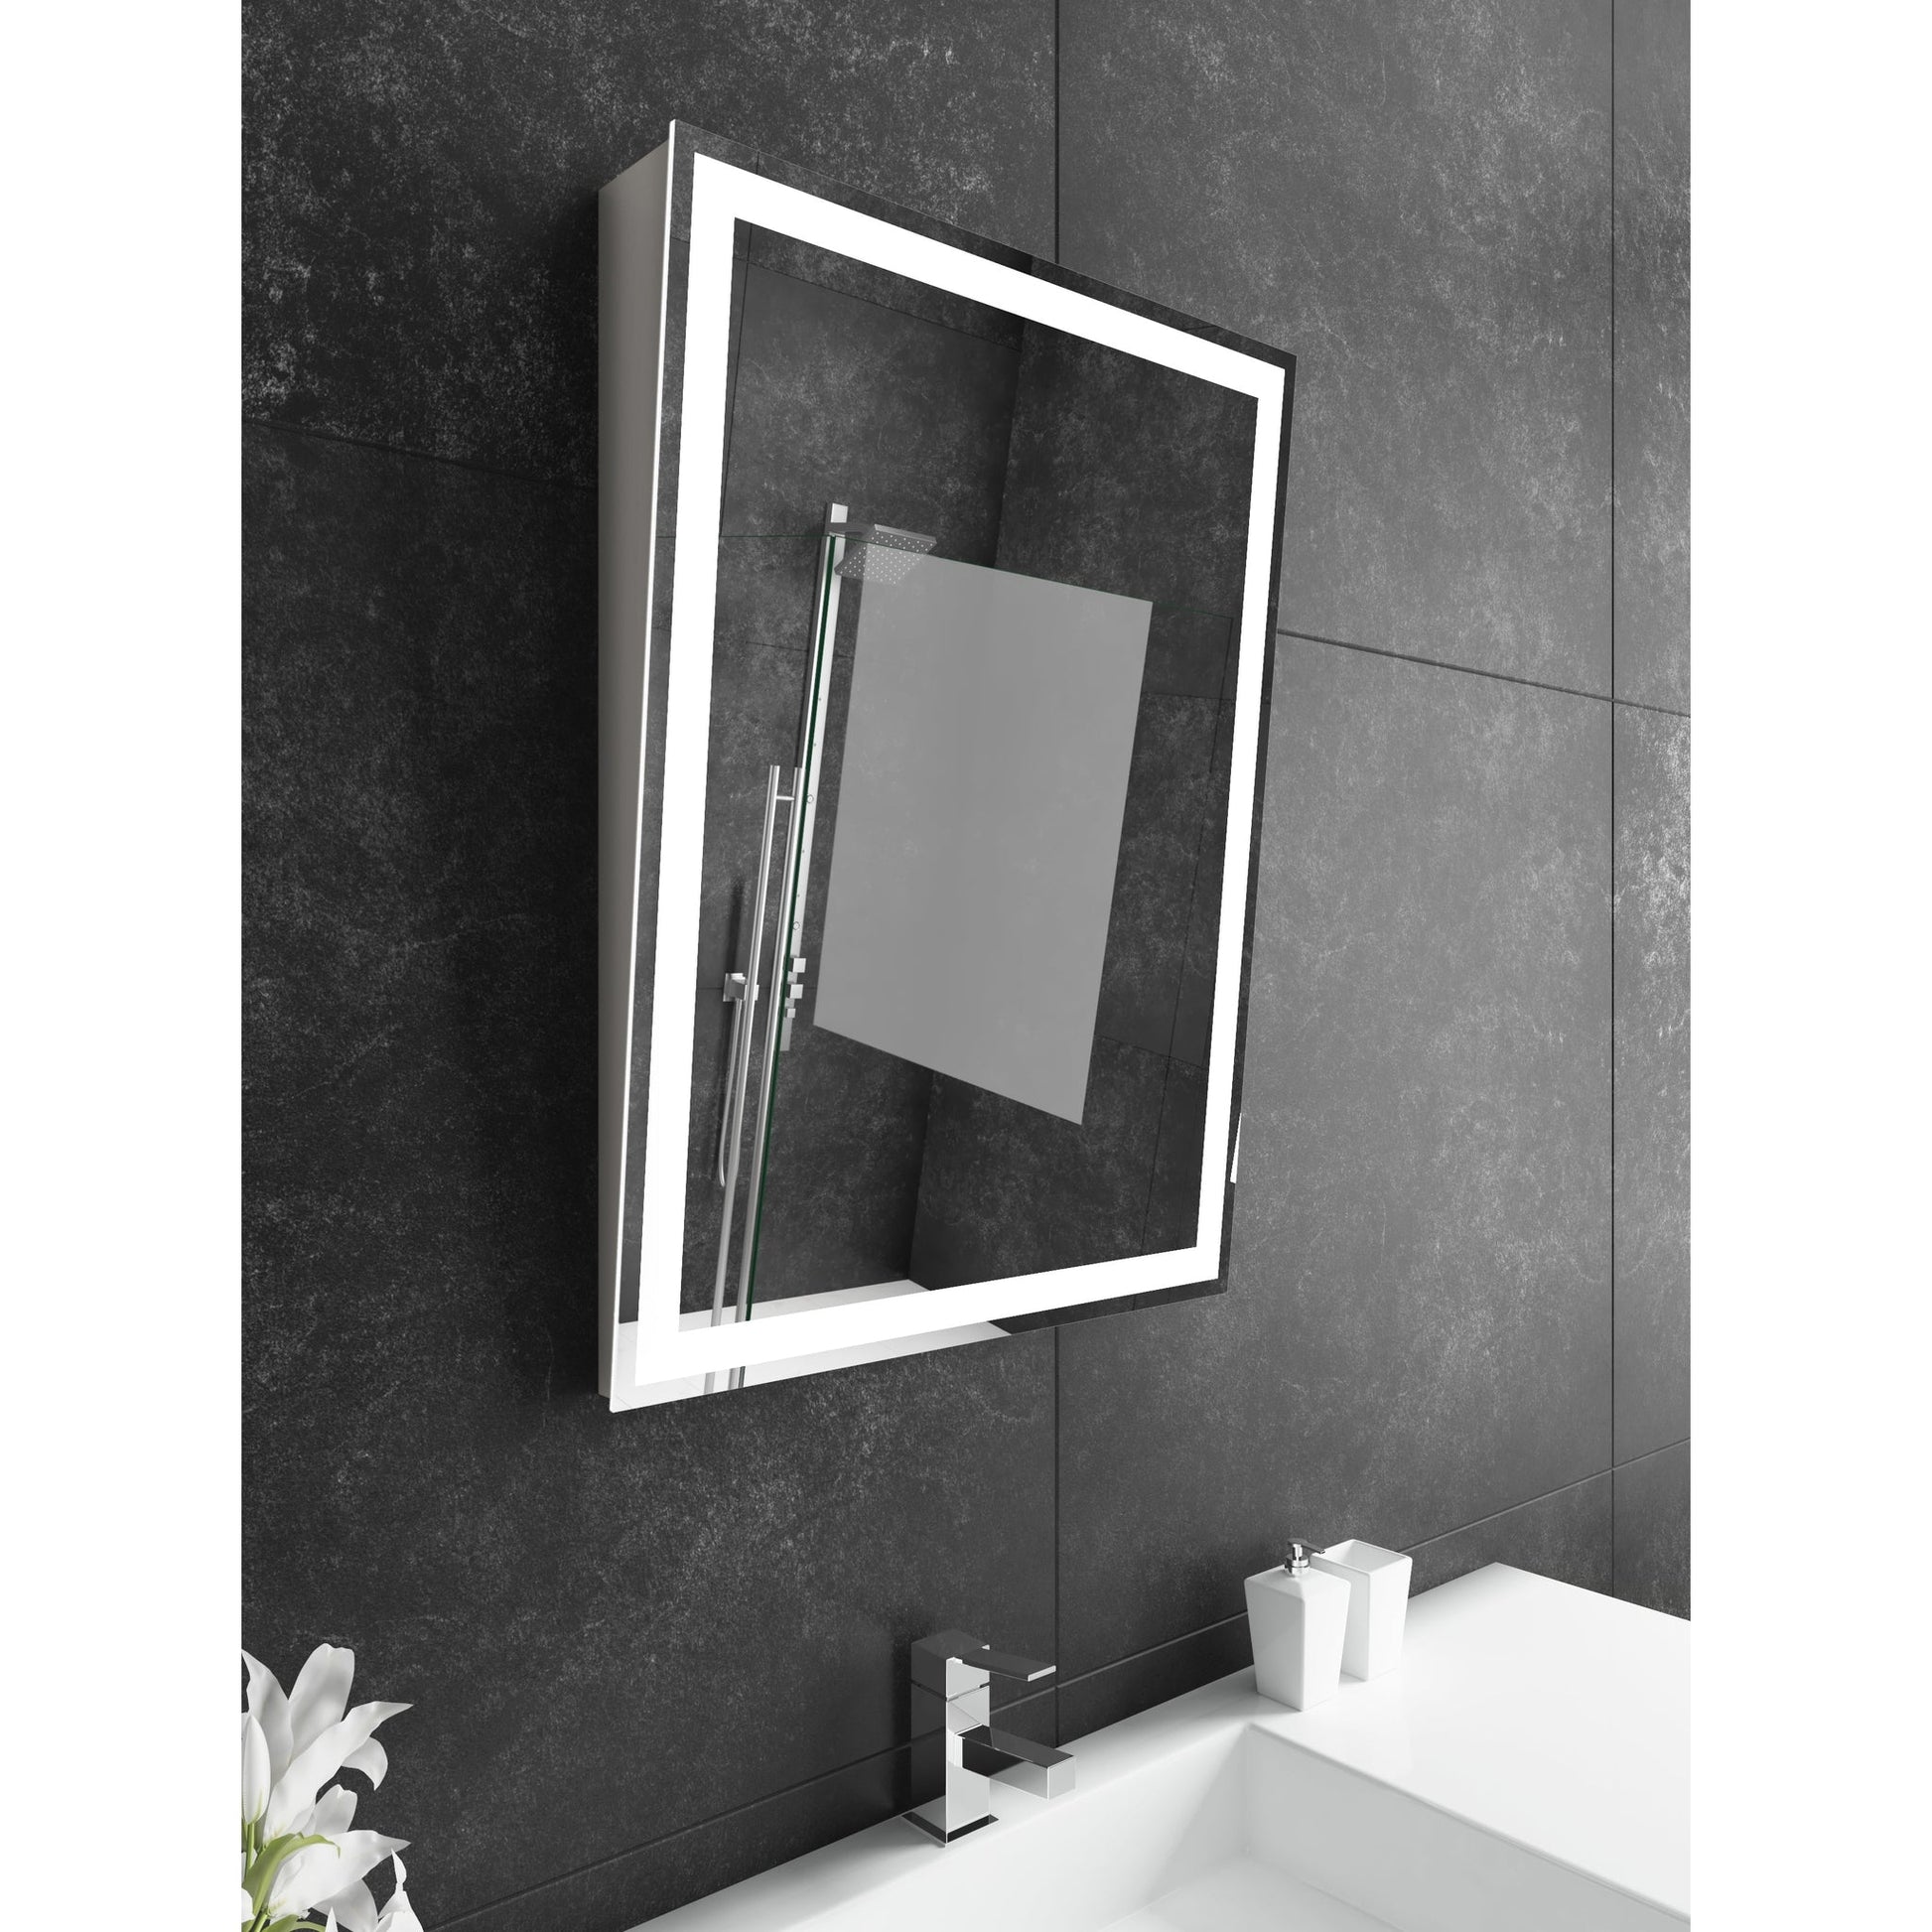 Paris Mirror Adira 24" x 32" Silver Front-Lit Lighted Super Bright Dimmable Wall-Mounted 6000K LED Mirror With Tilted Top Frame